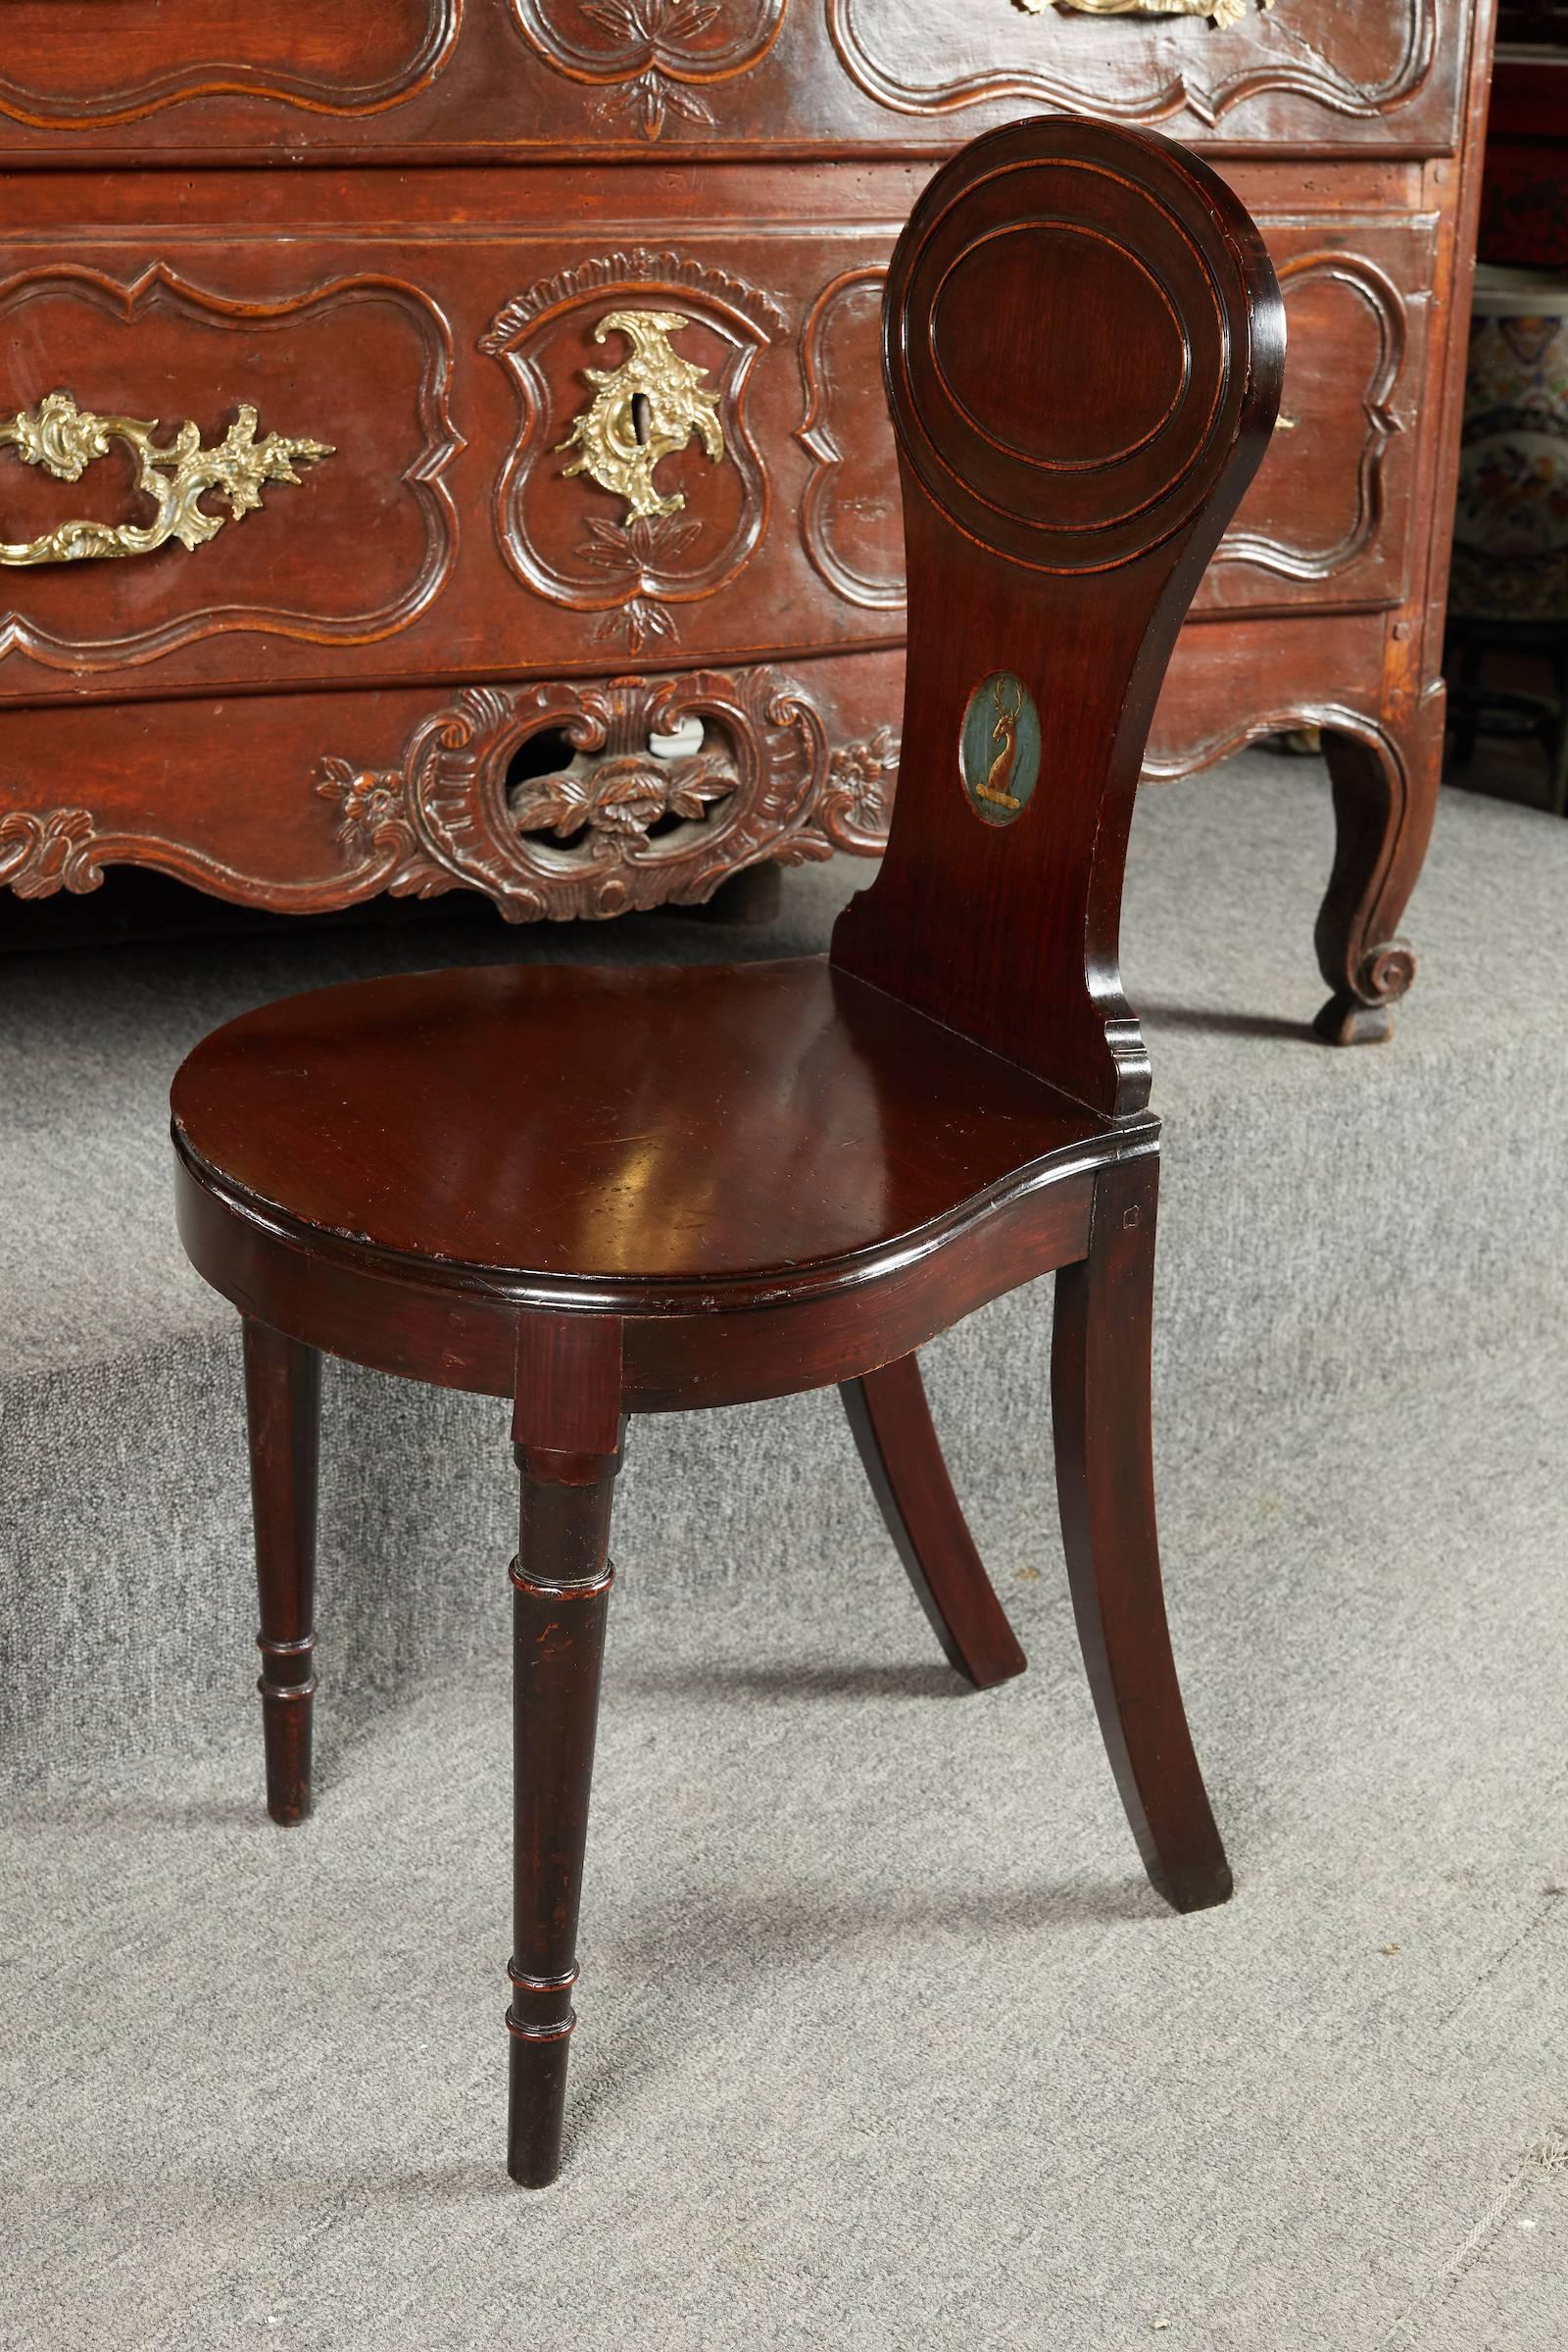 Elegant pair of Georgian period carved mahogany hall chairs the back decorated with a deer armorial crest.